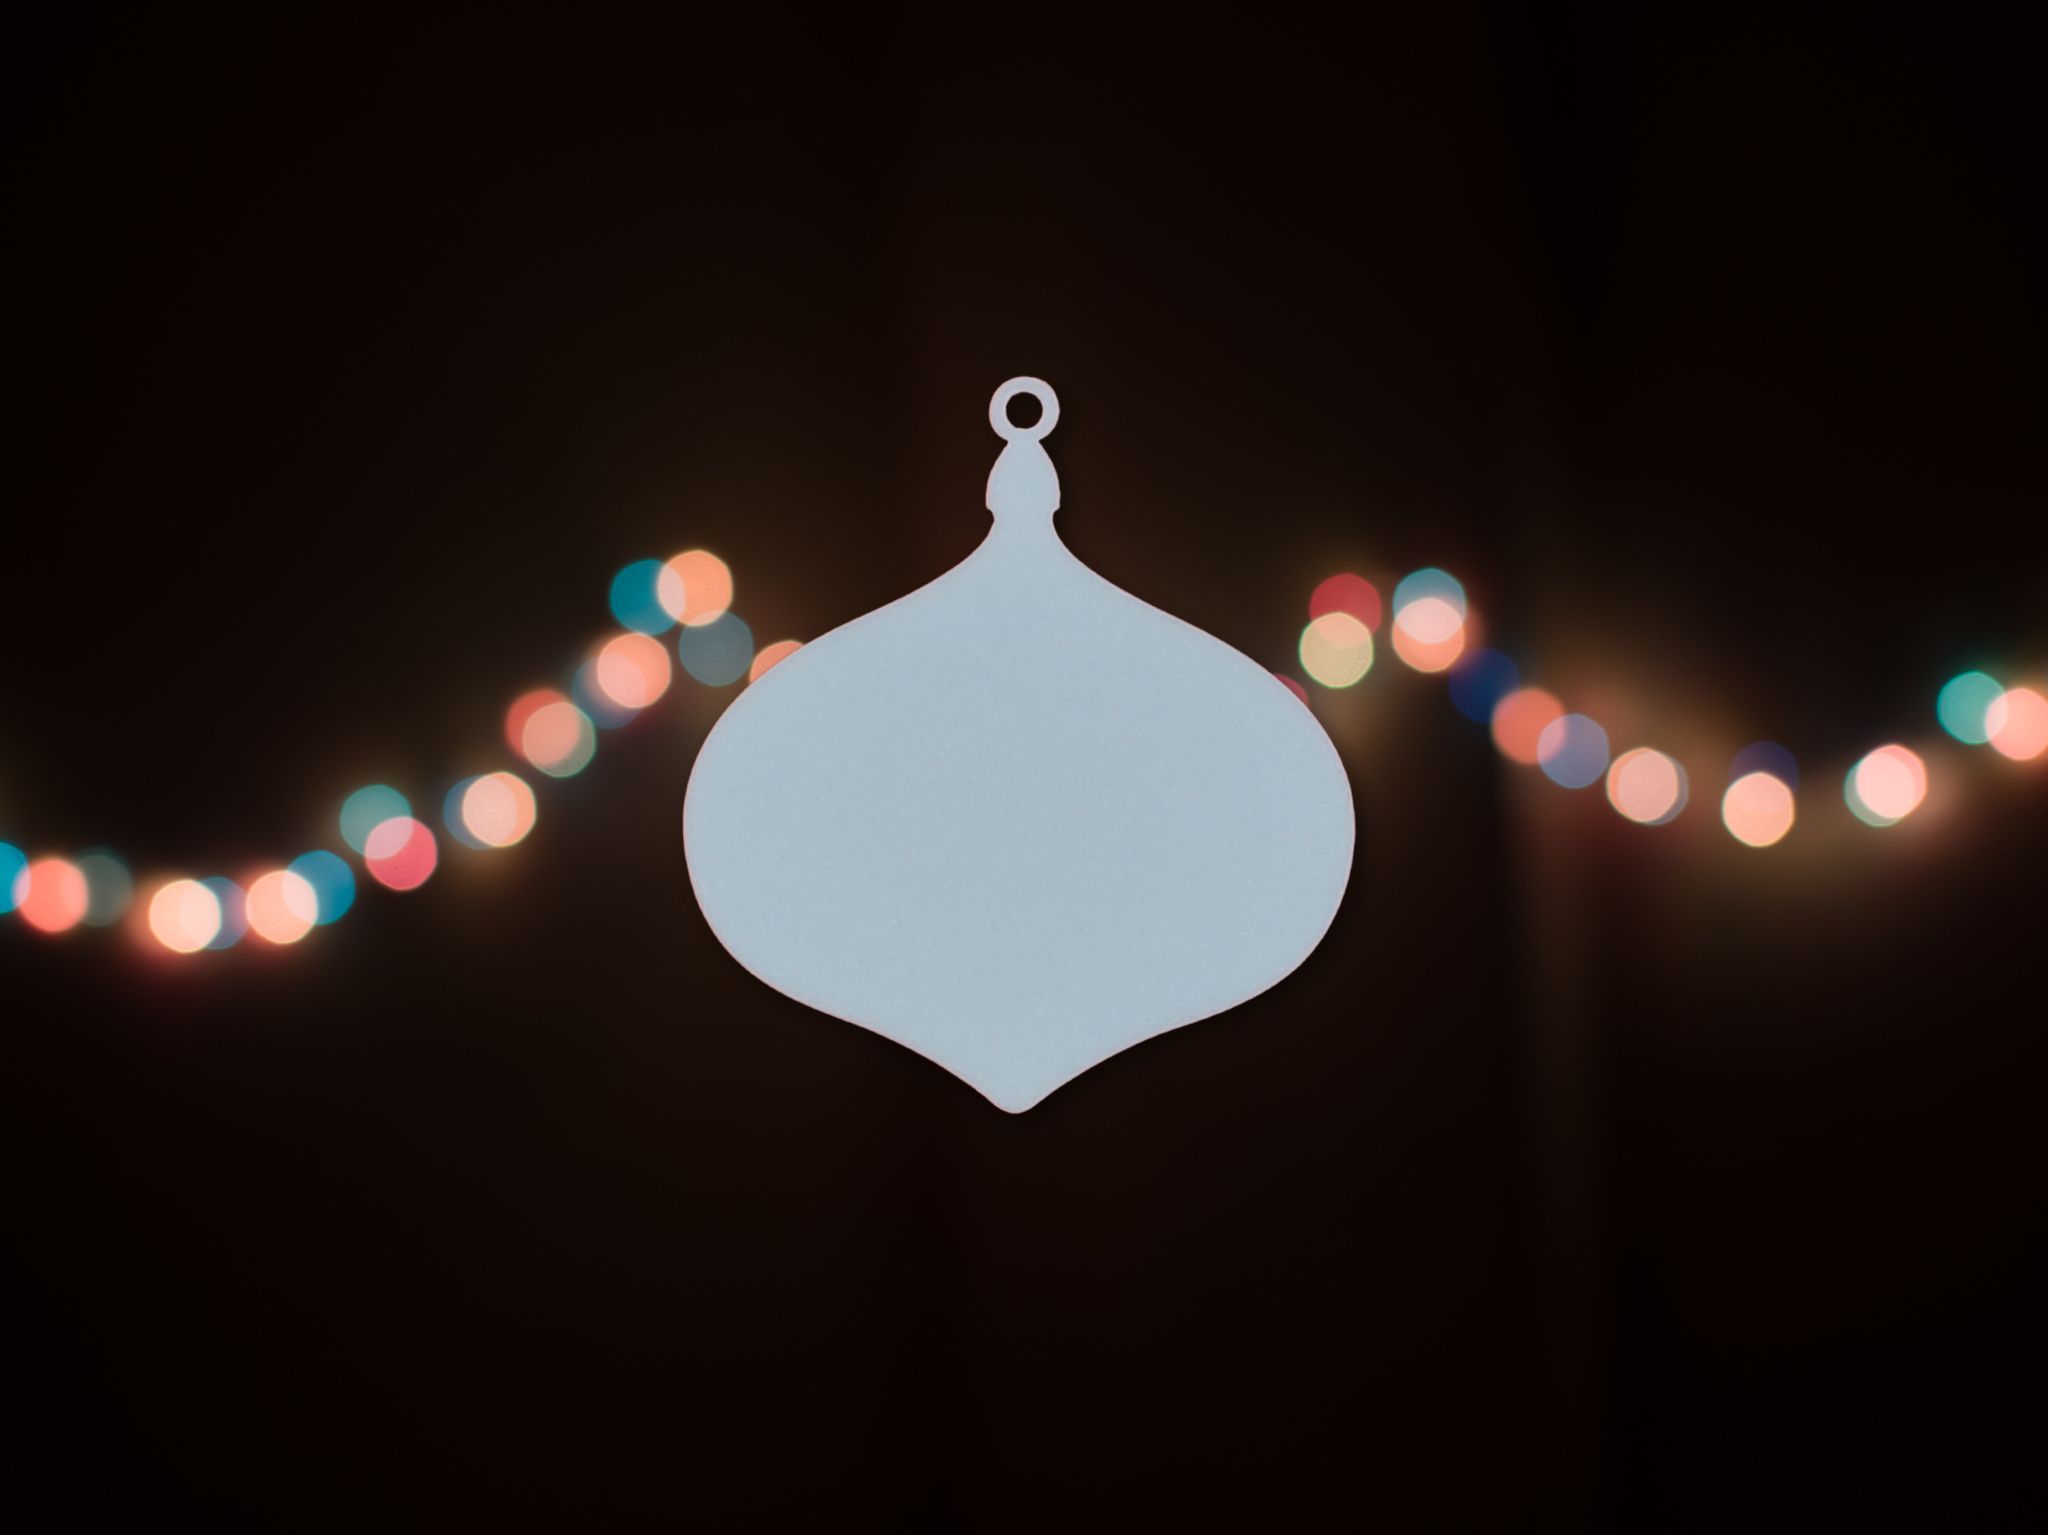 Laser Cut Christmas Bauble Ornament Unfinished Bauble Free Vector